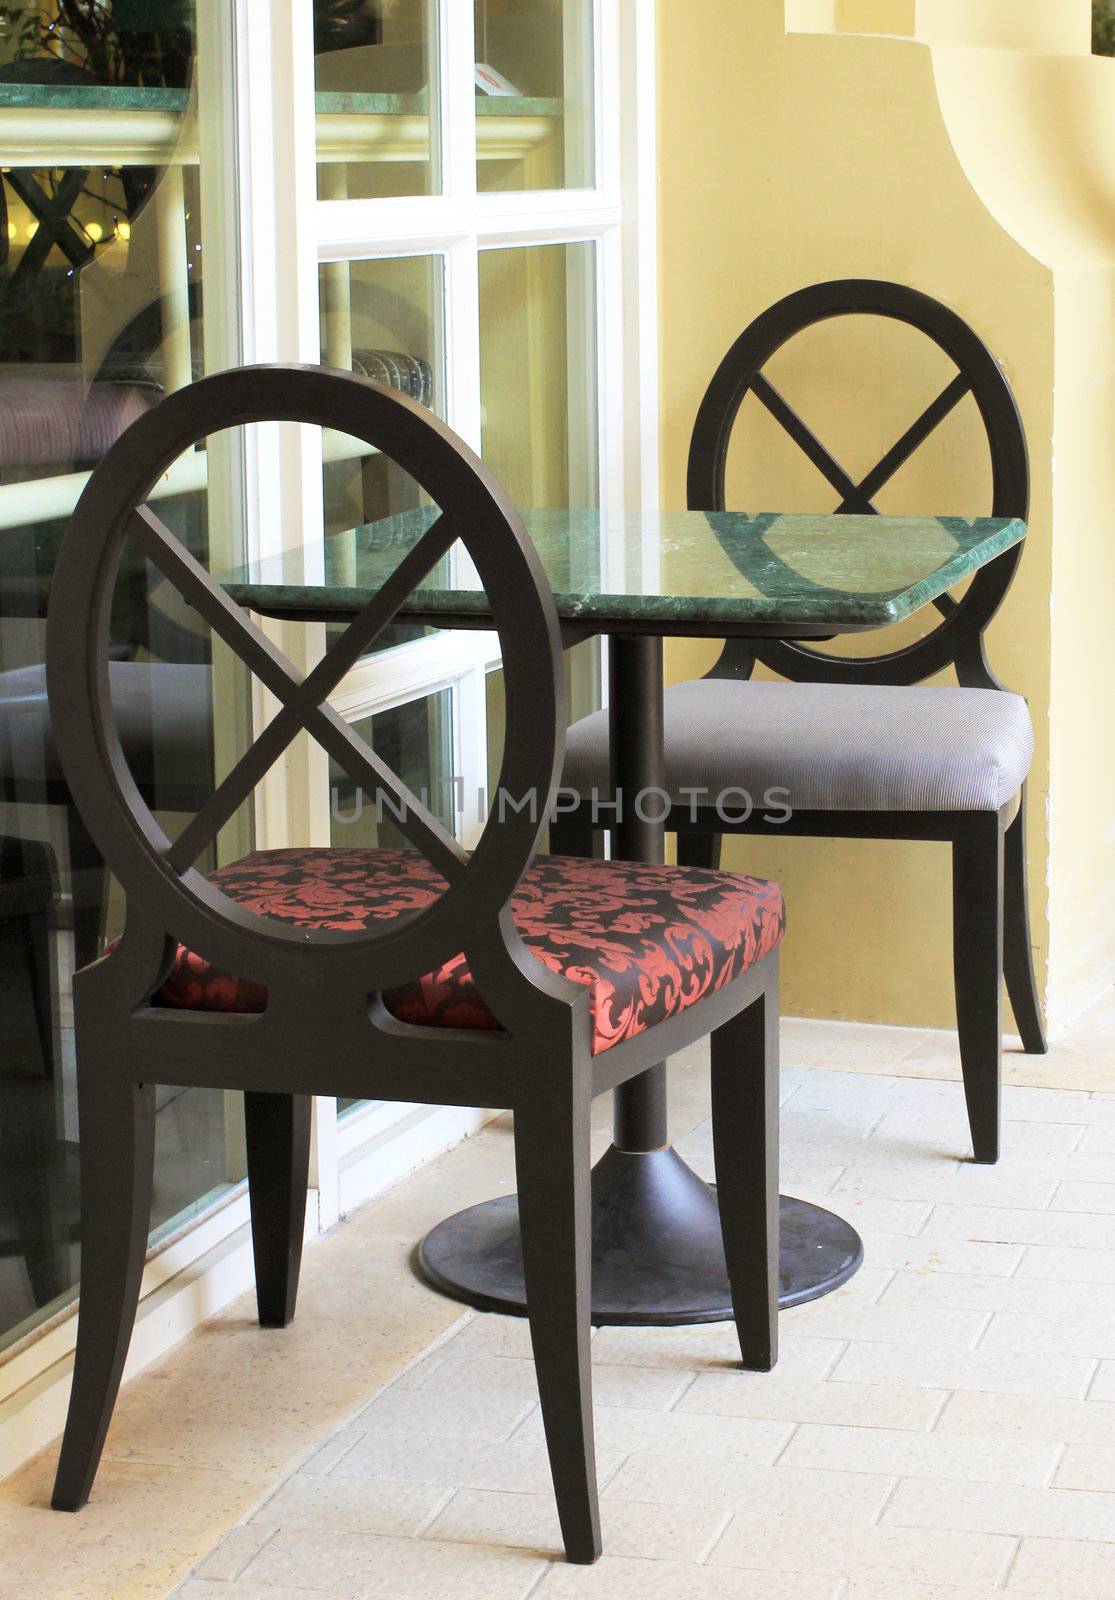 Modern table and chair setting in outdoor restaurant